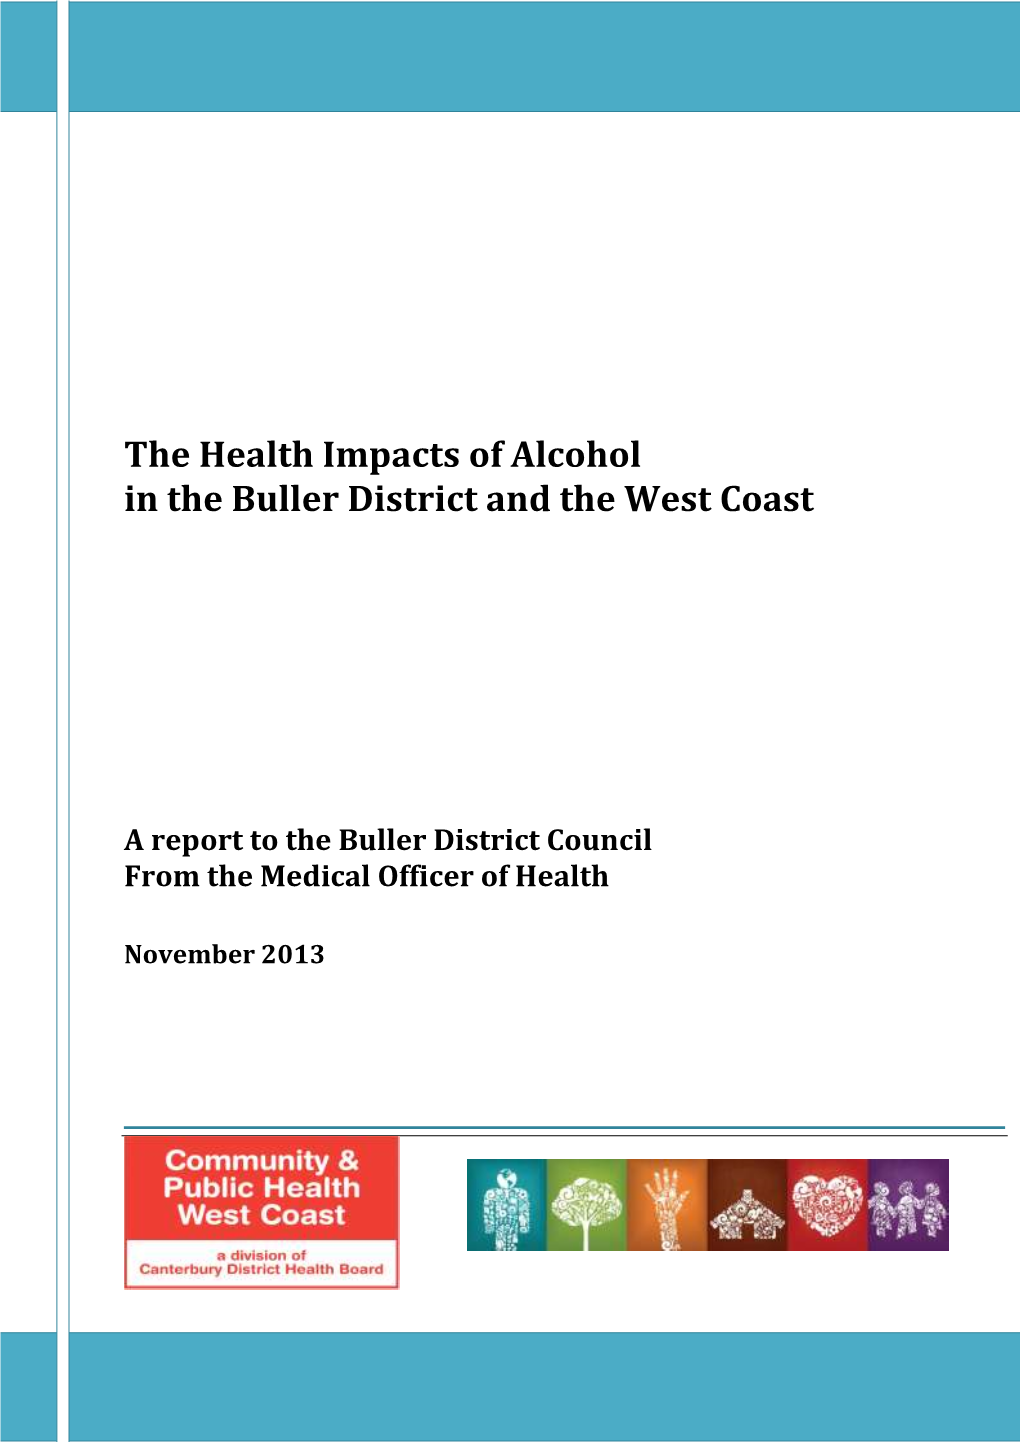 The Health Impacts of Alcohol in the Buller District and the West Coast